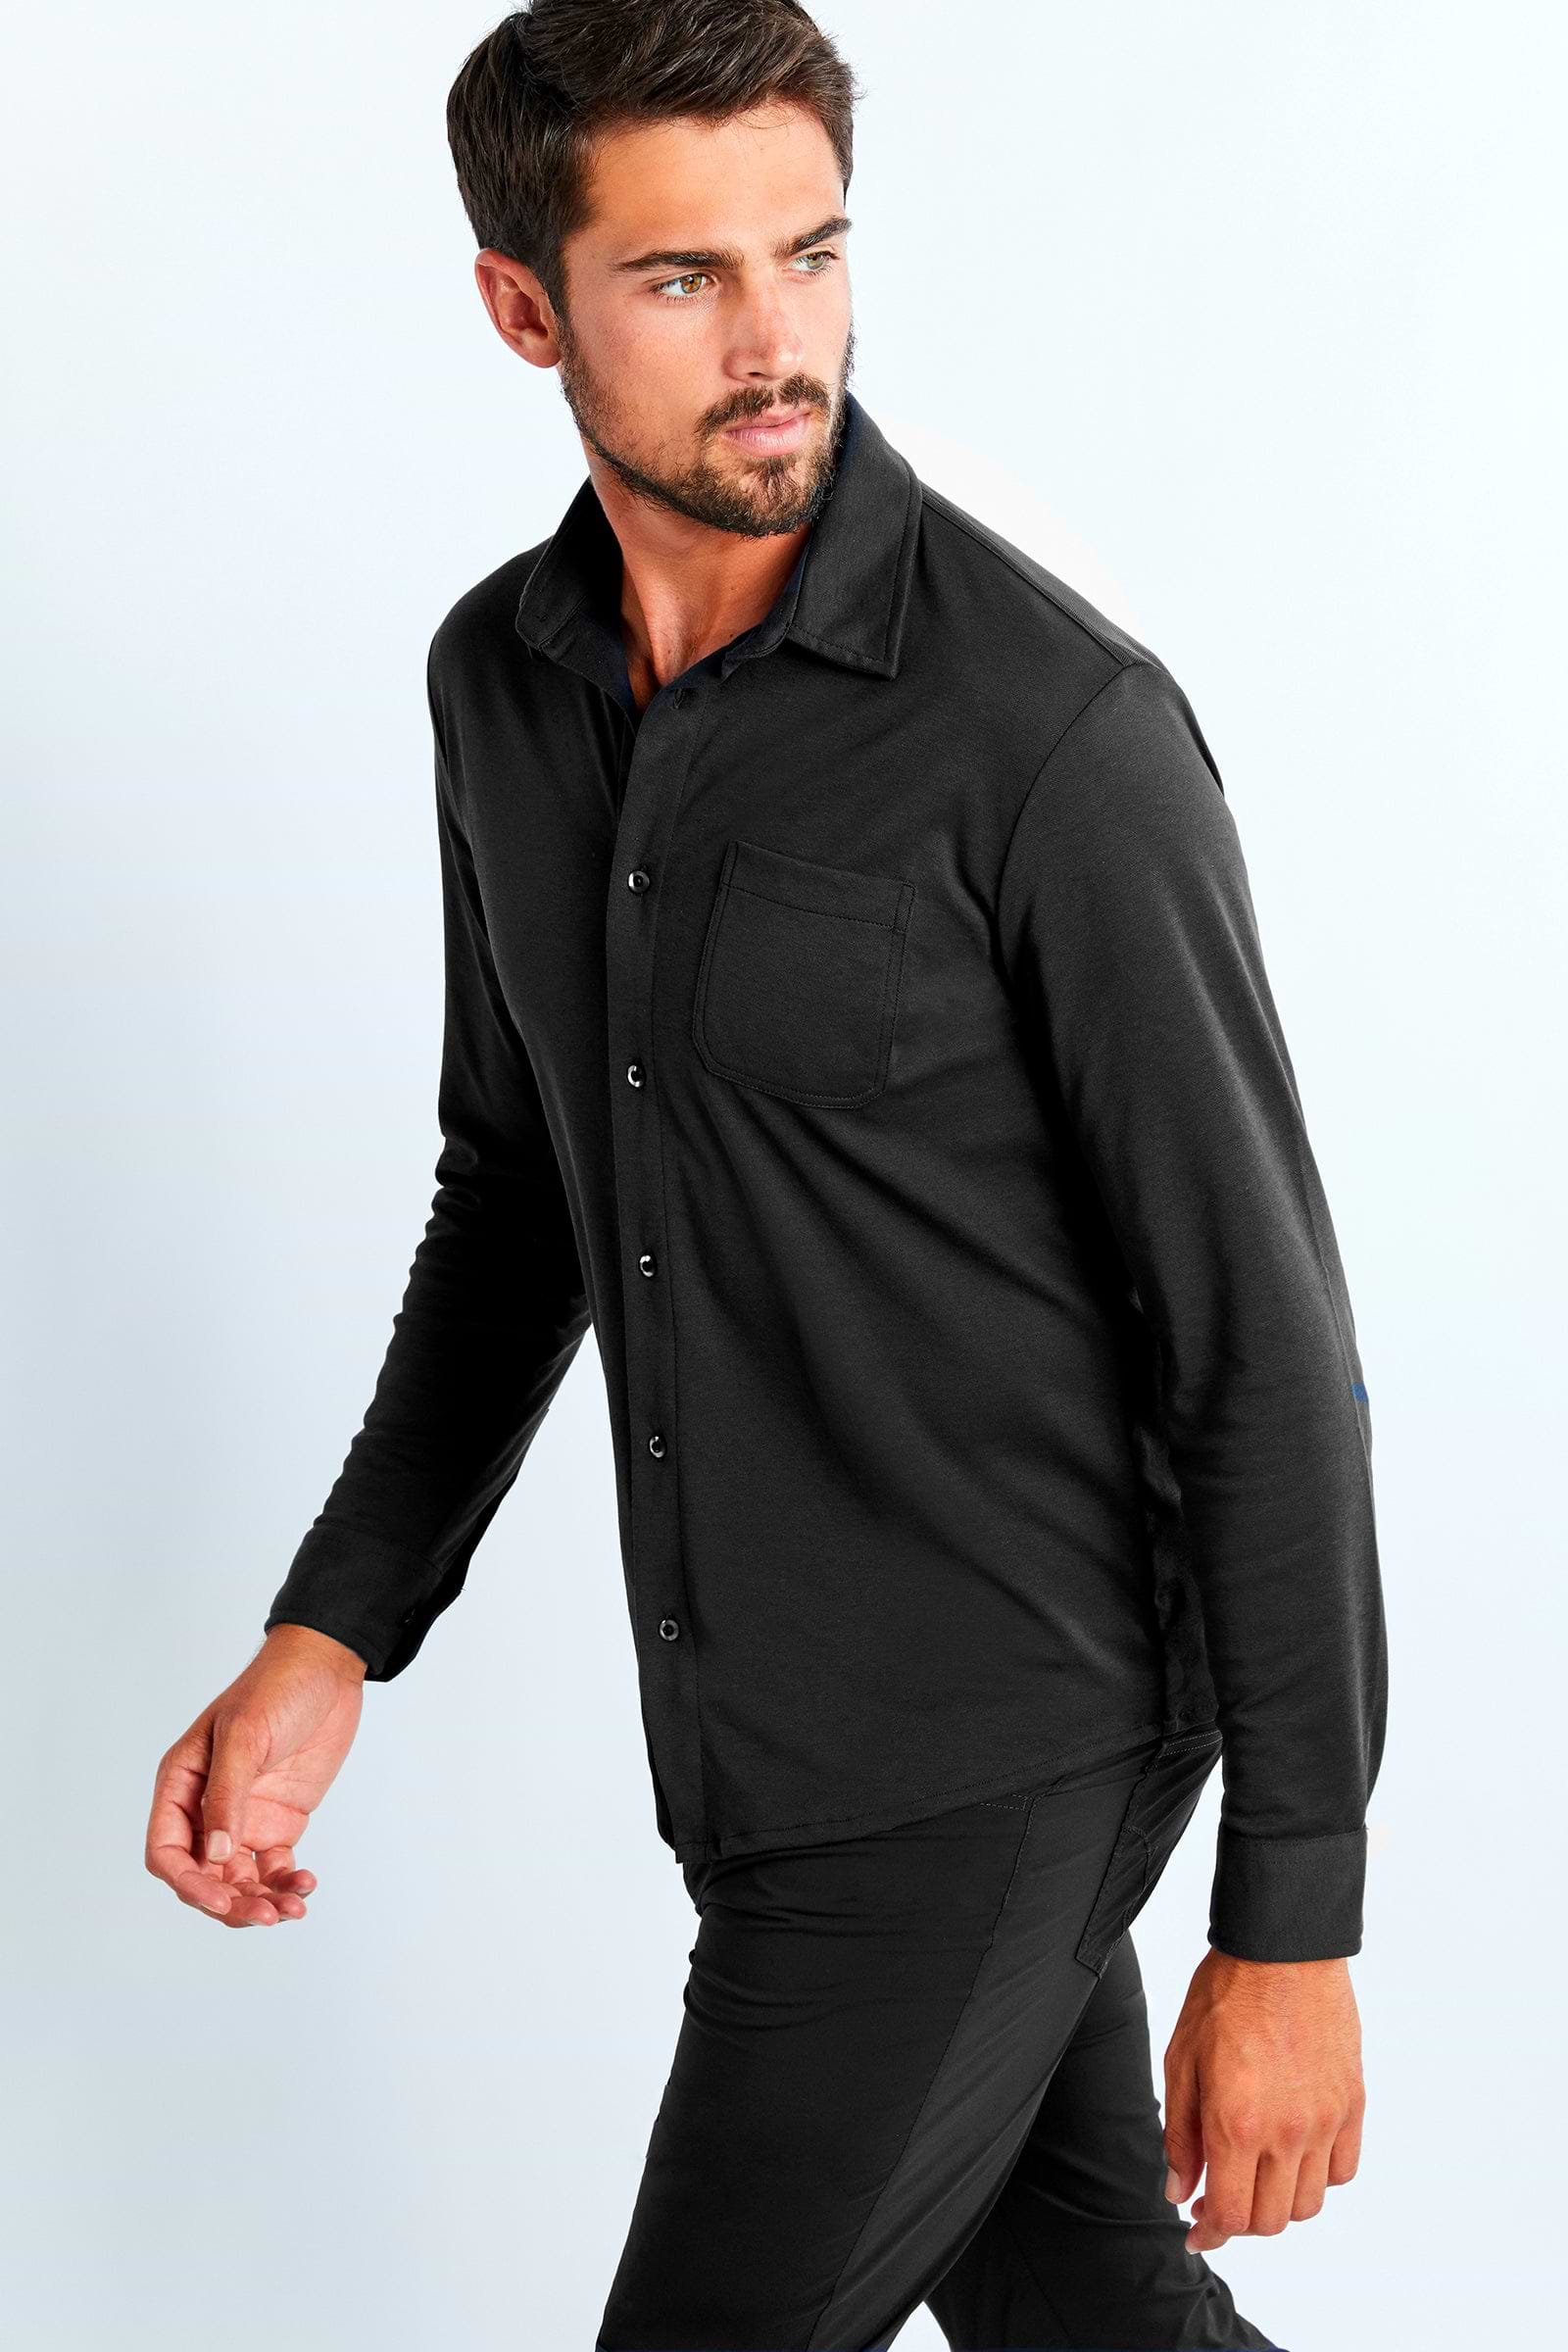 The Best Travel Top. Man Showing the Side Profile of a Men's Nick Top in Black.